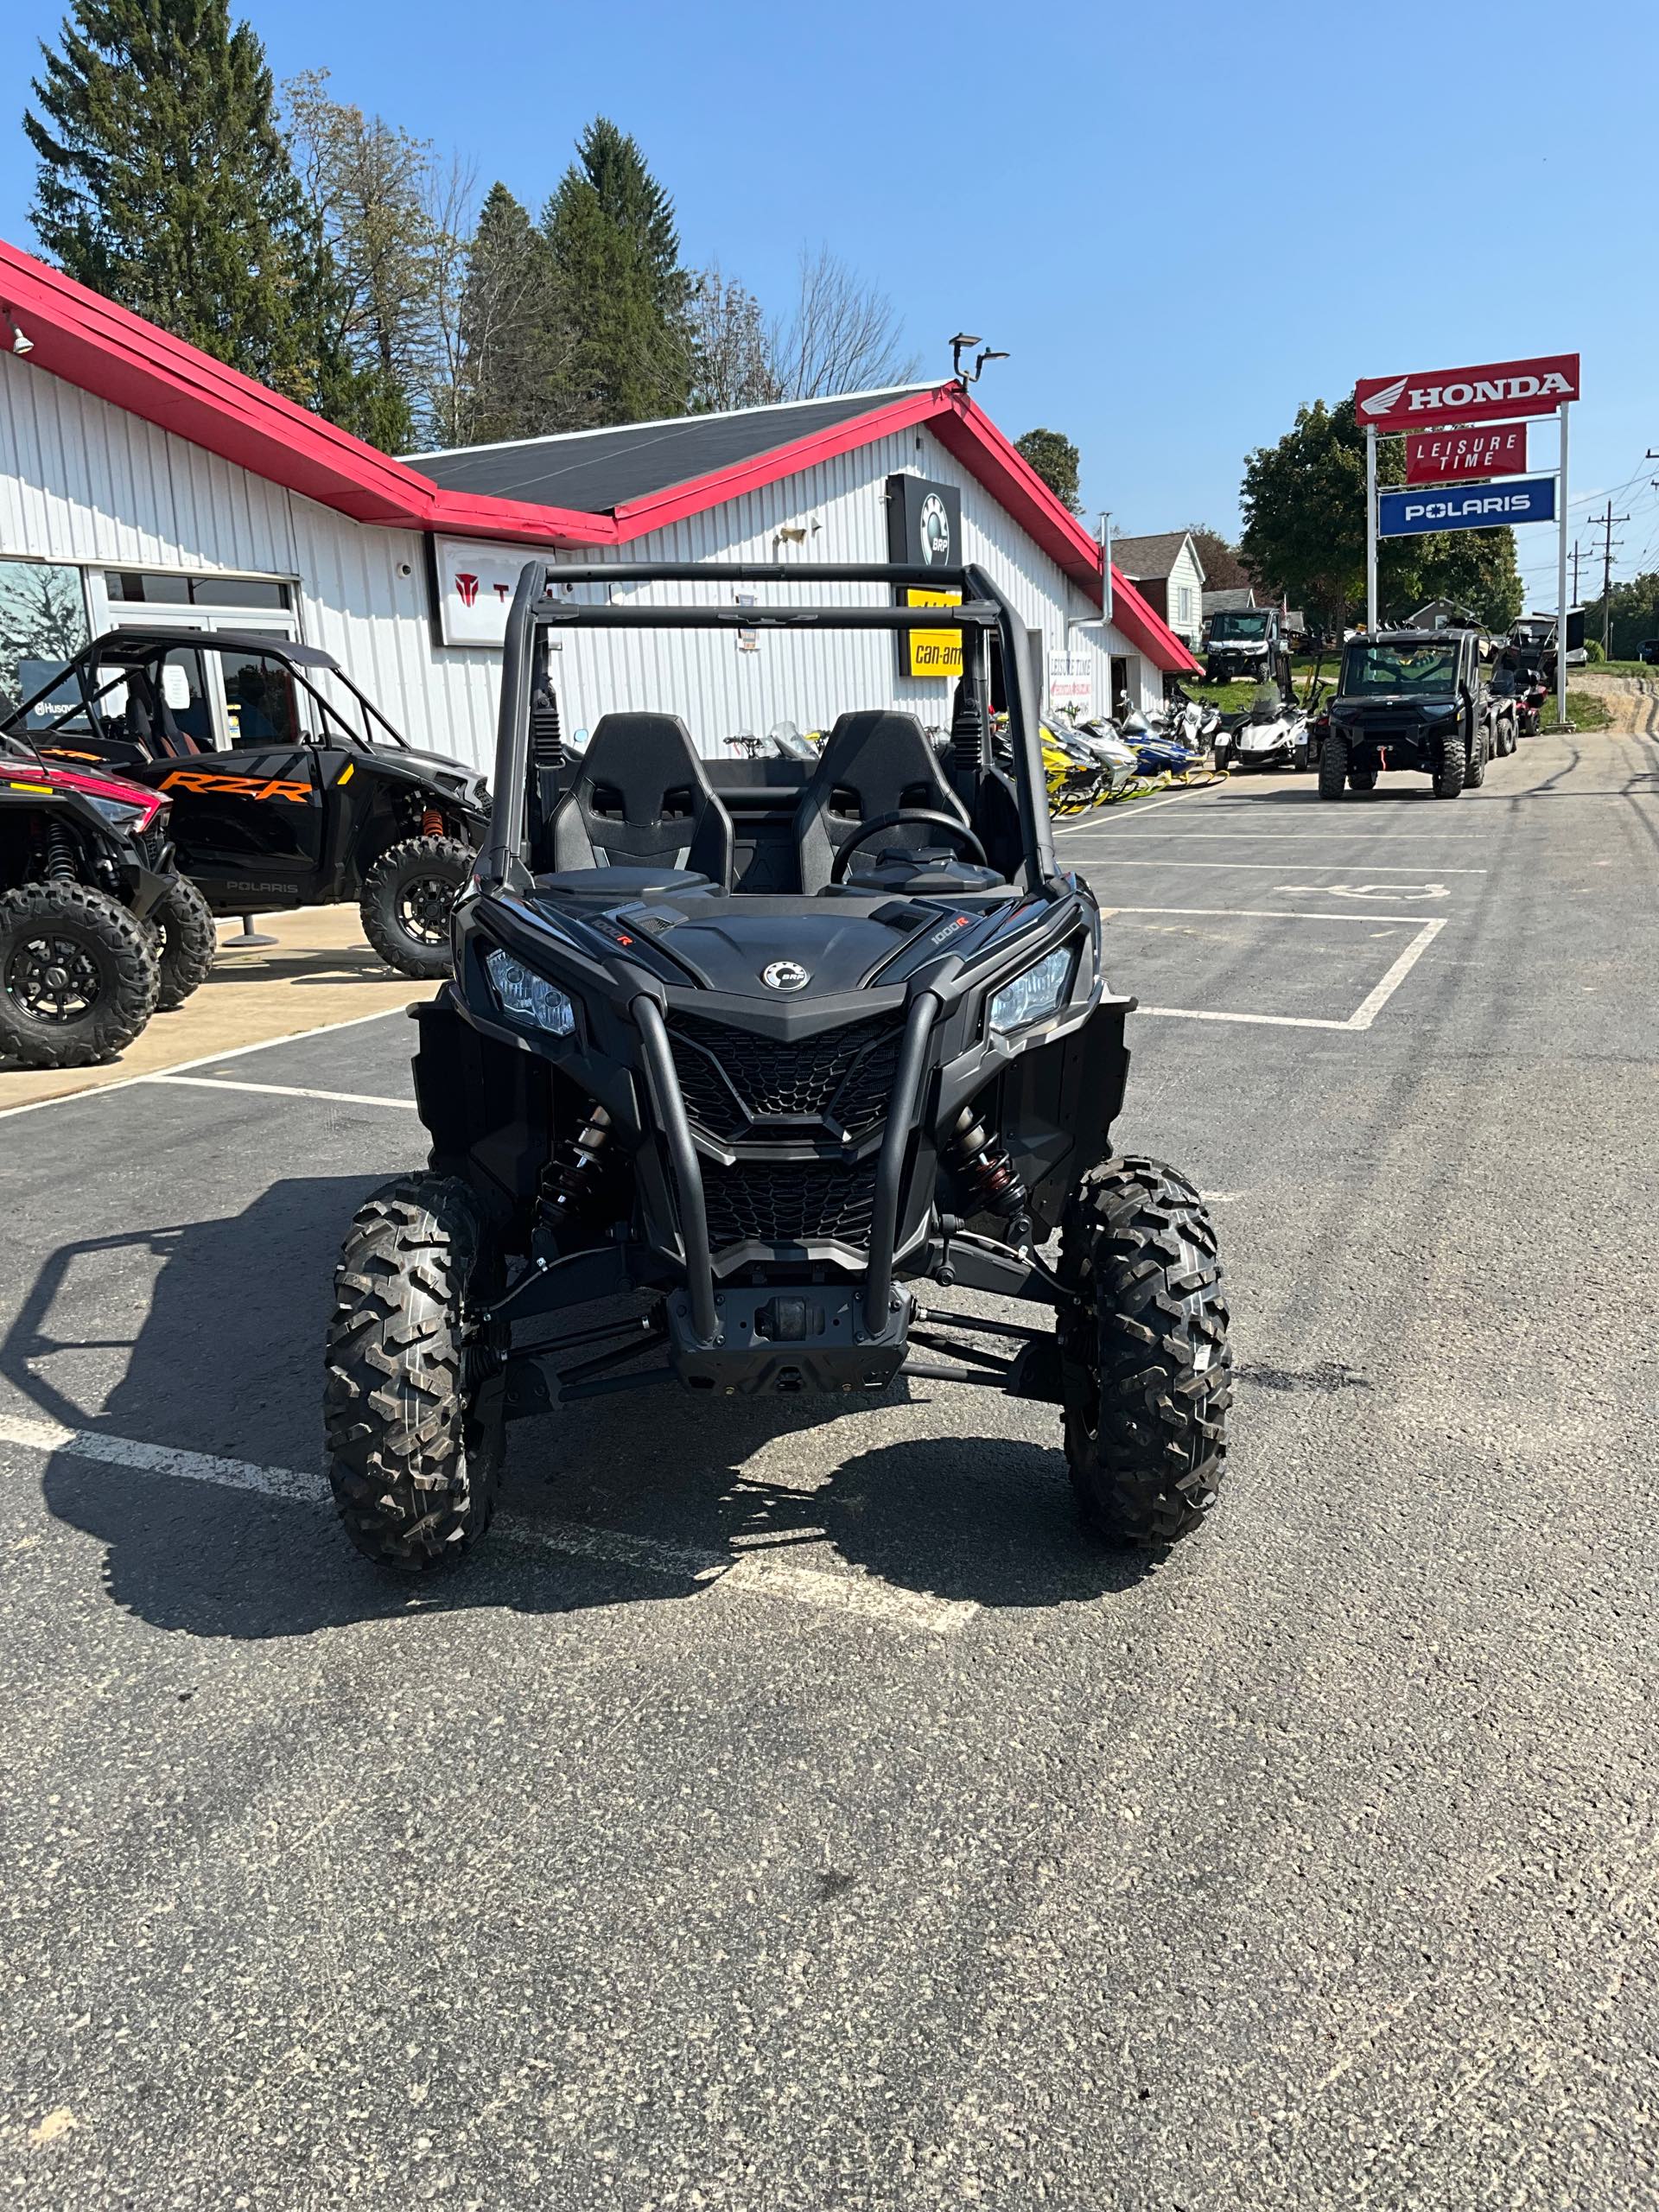 2023 Can-Am Maverick Sport DPS 1000R at Leisure Time Powersports of Corry